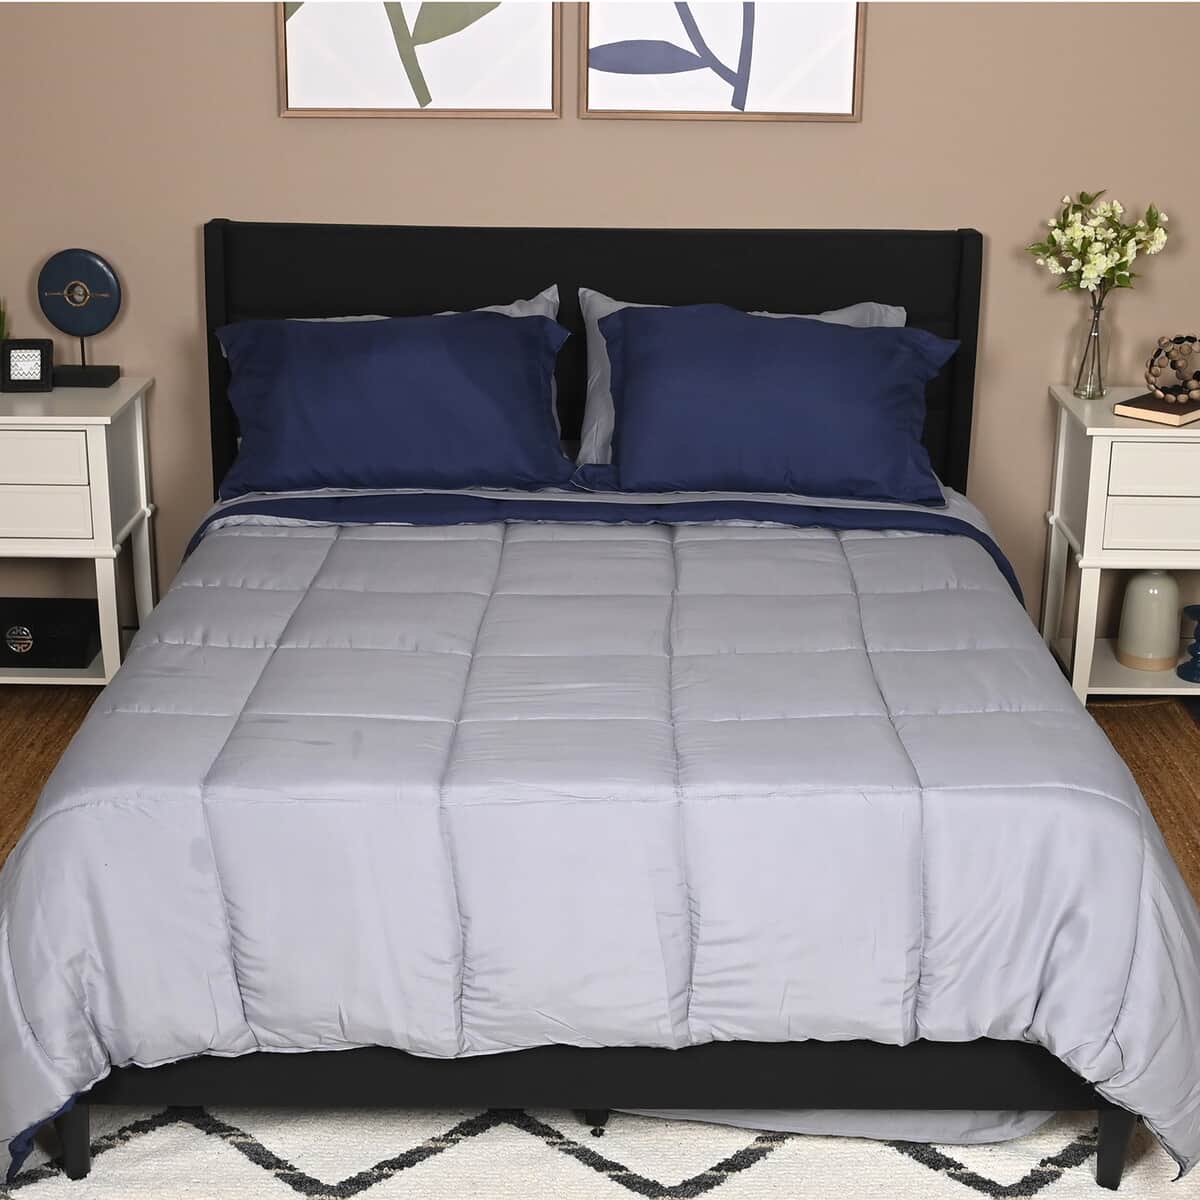 Victory Classic New York Closeout Lincoln Black, White Reversible 5pc Bed in a Bag Comforter Set includes Sheet Set - XL Twin image number 1